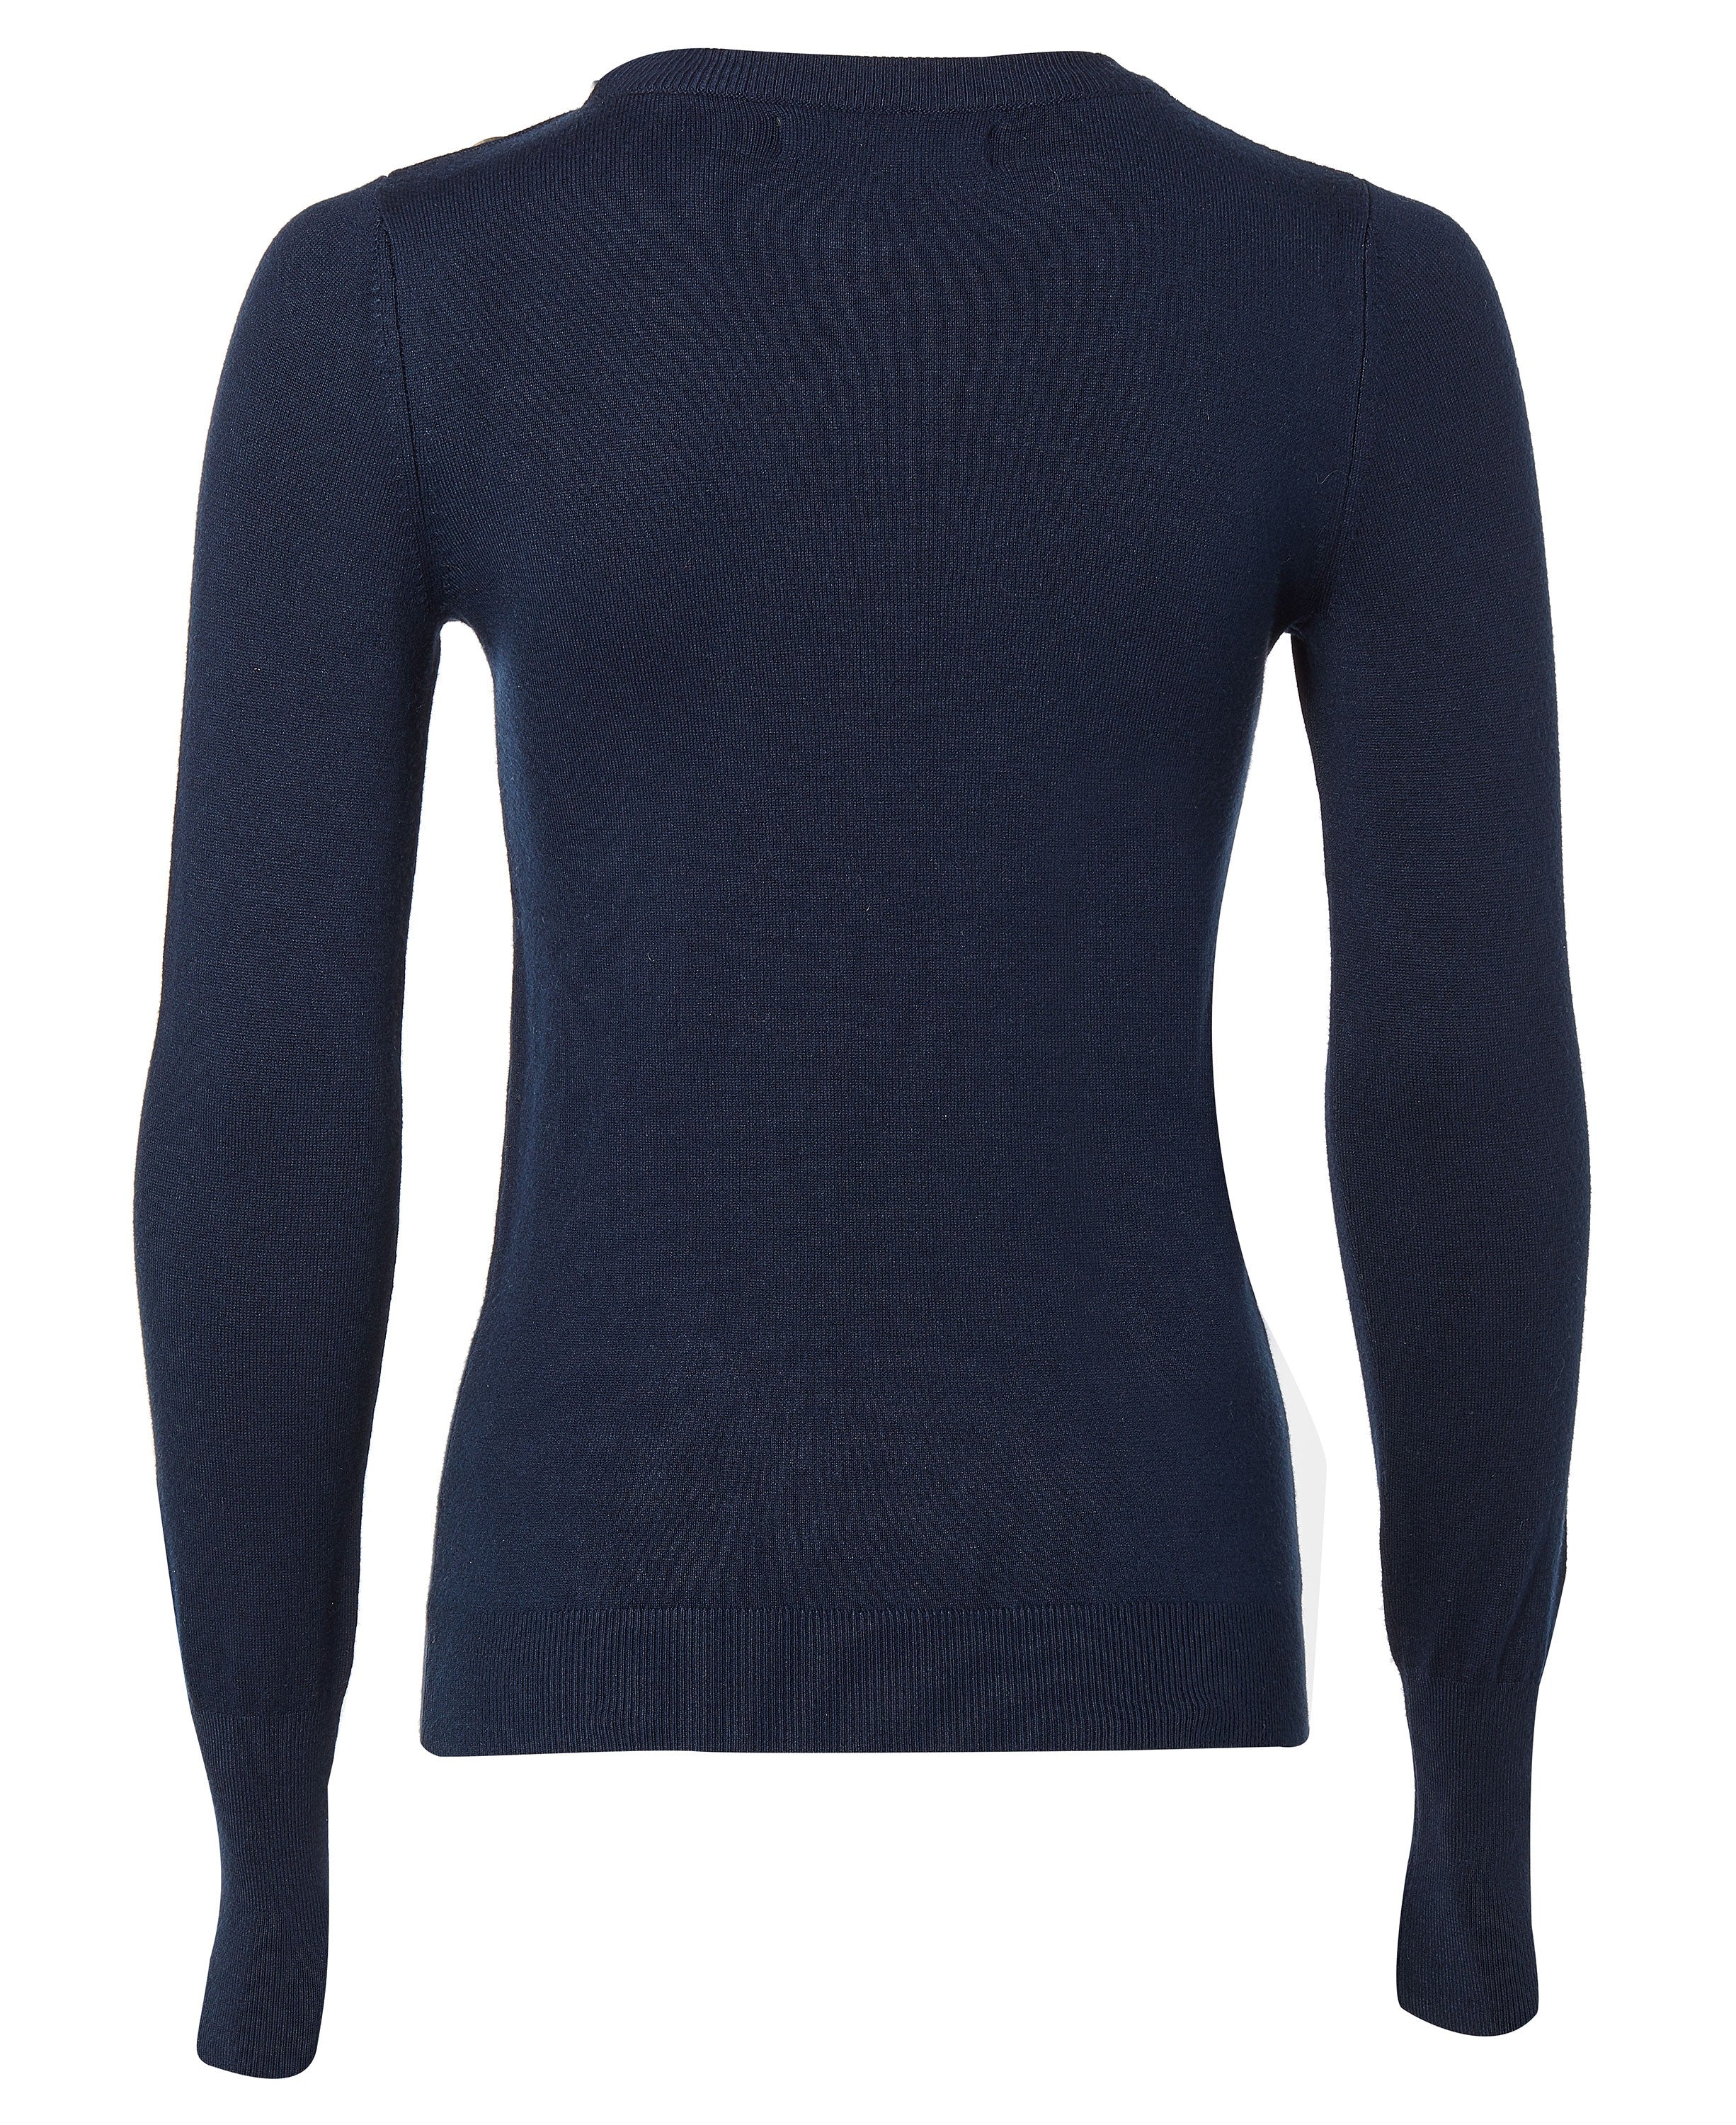 Buttoned Knit Crew Neck - Ink Navy